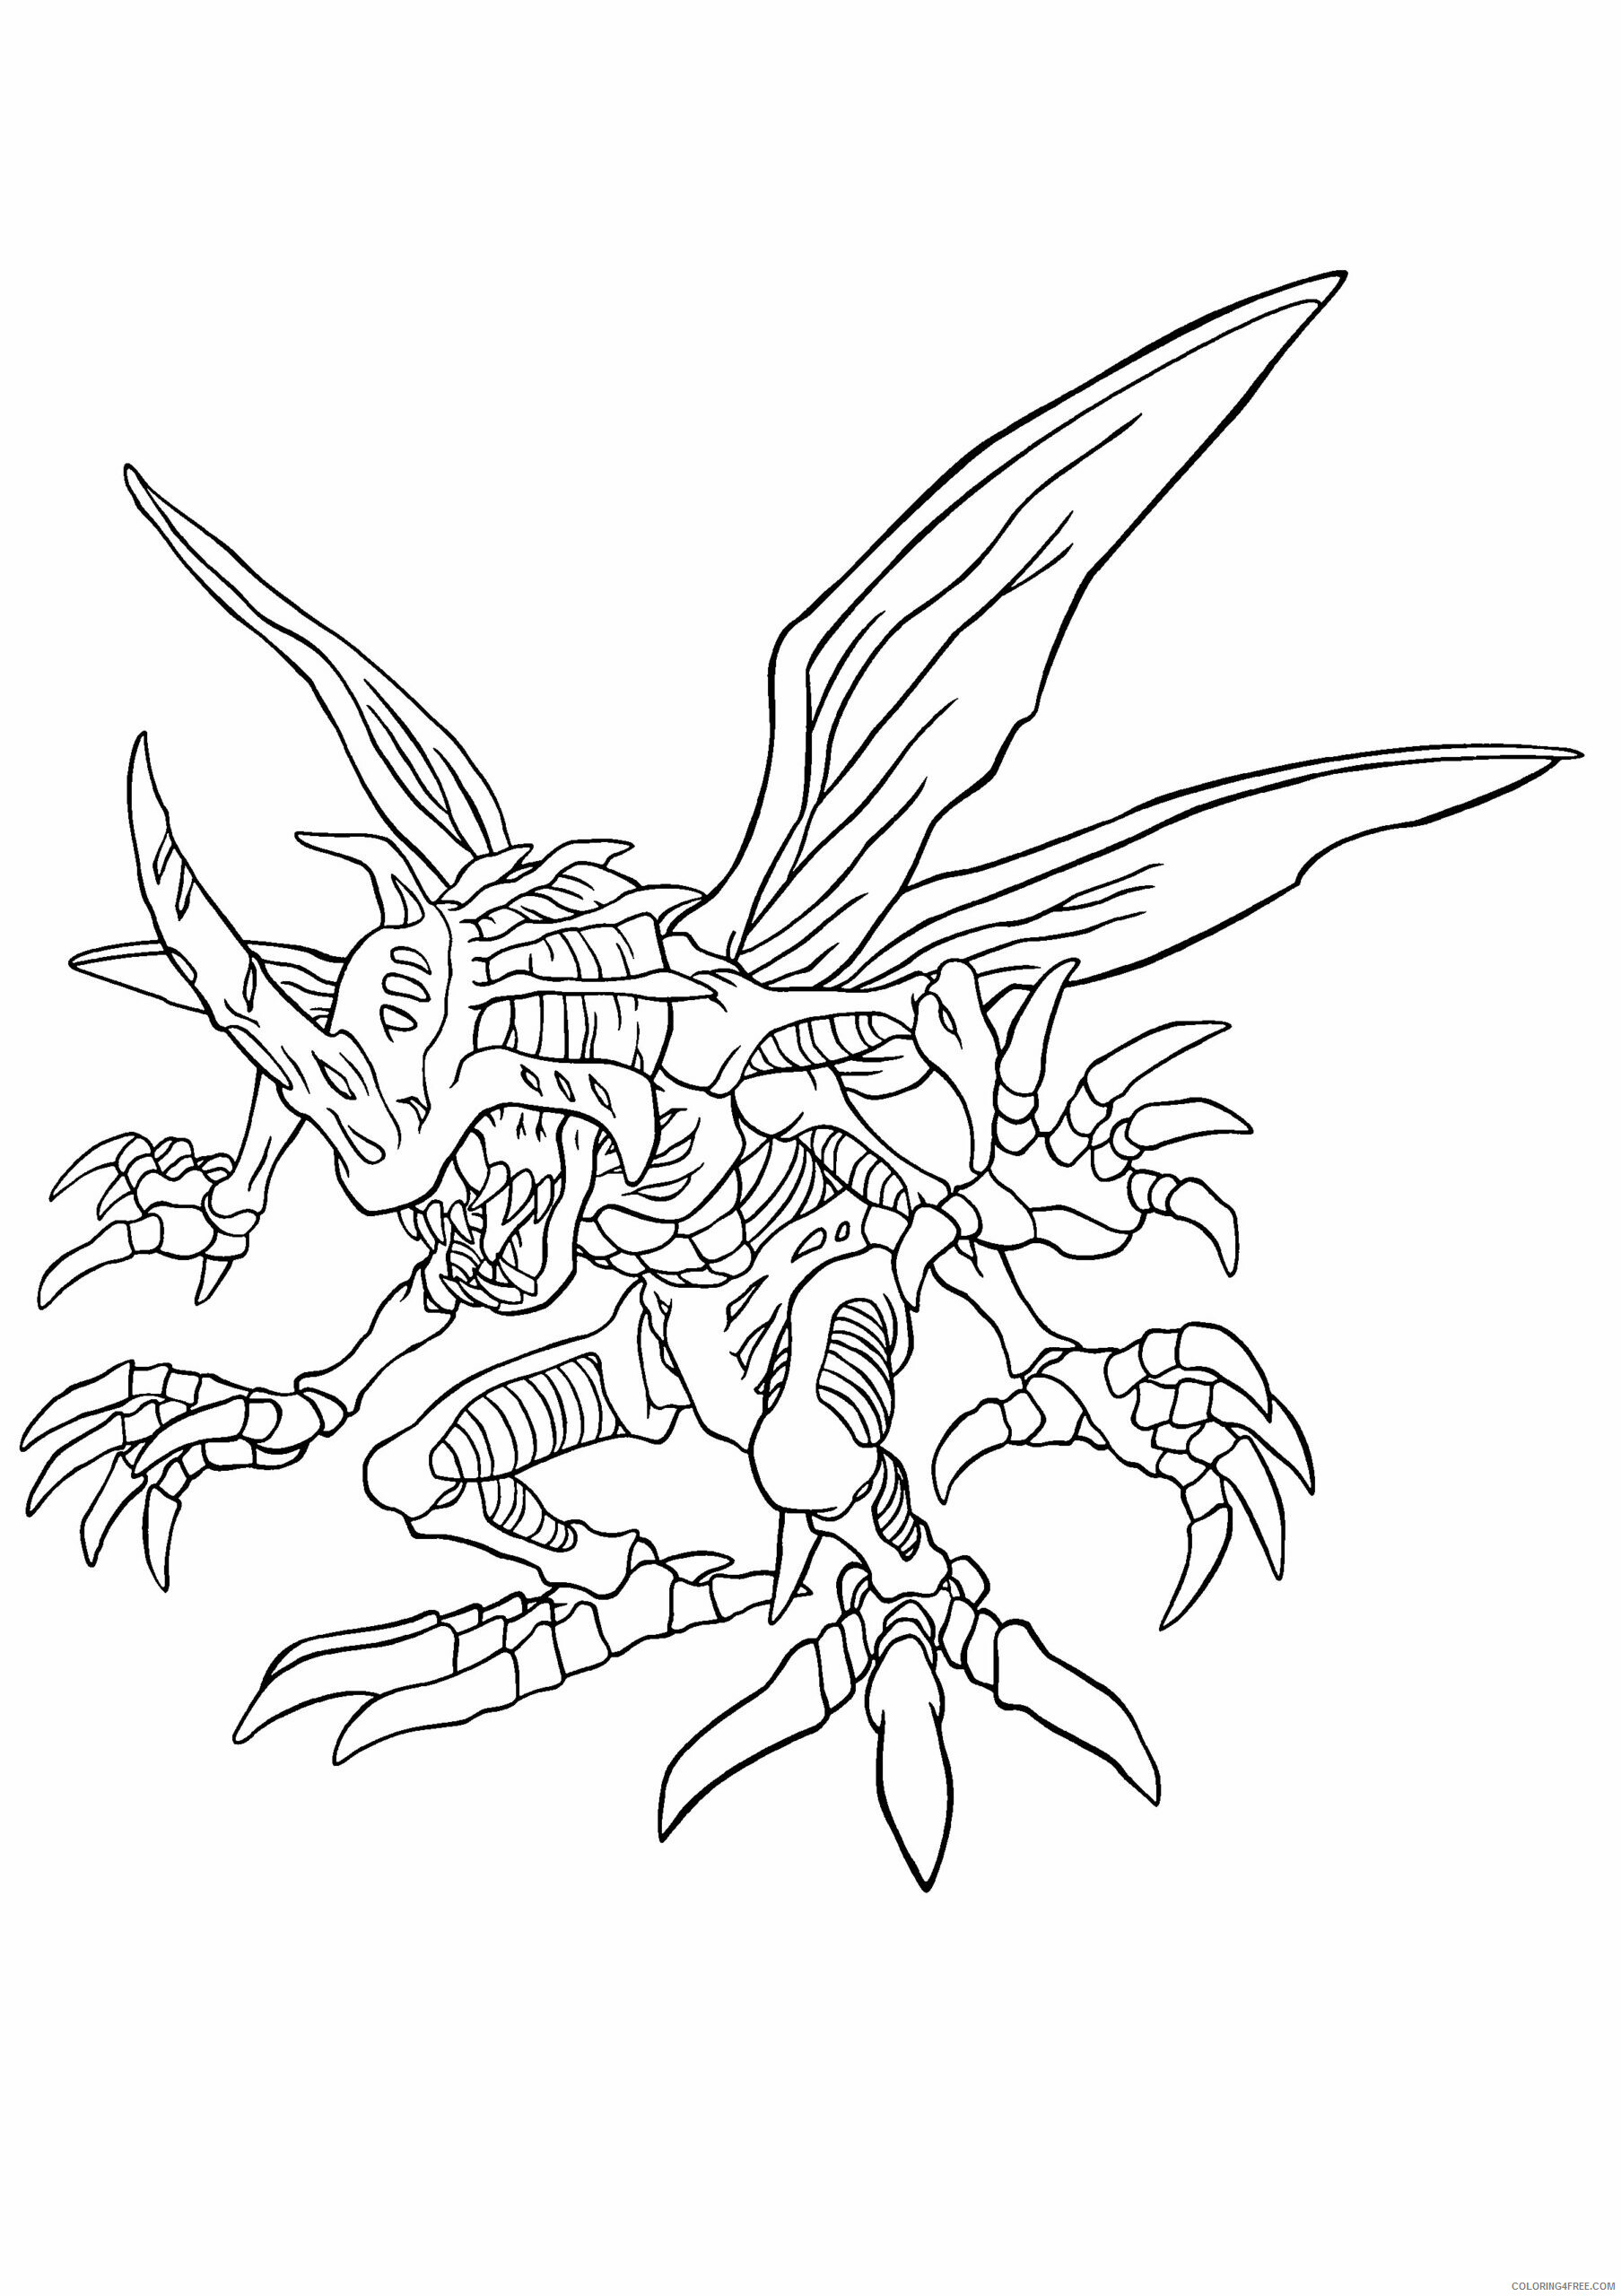 Digimon Printable Coloring Pages Anime digimon 110 2021 0217 Coloring4free